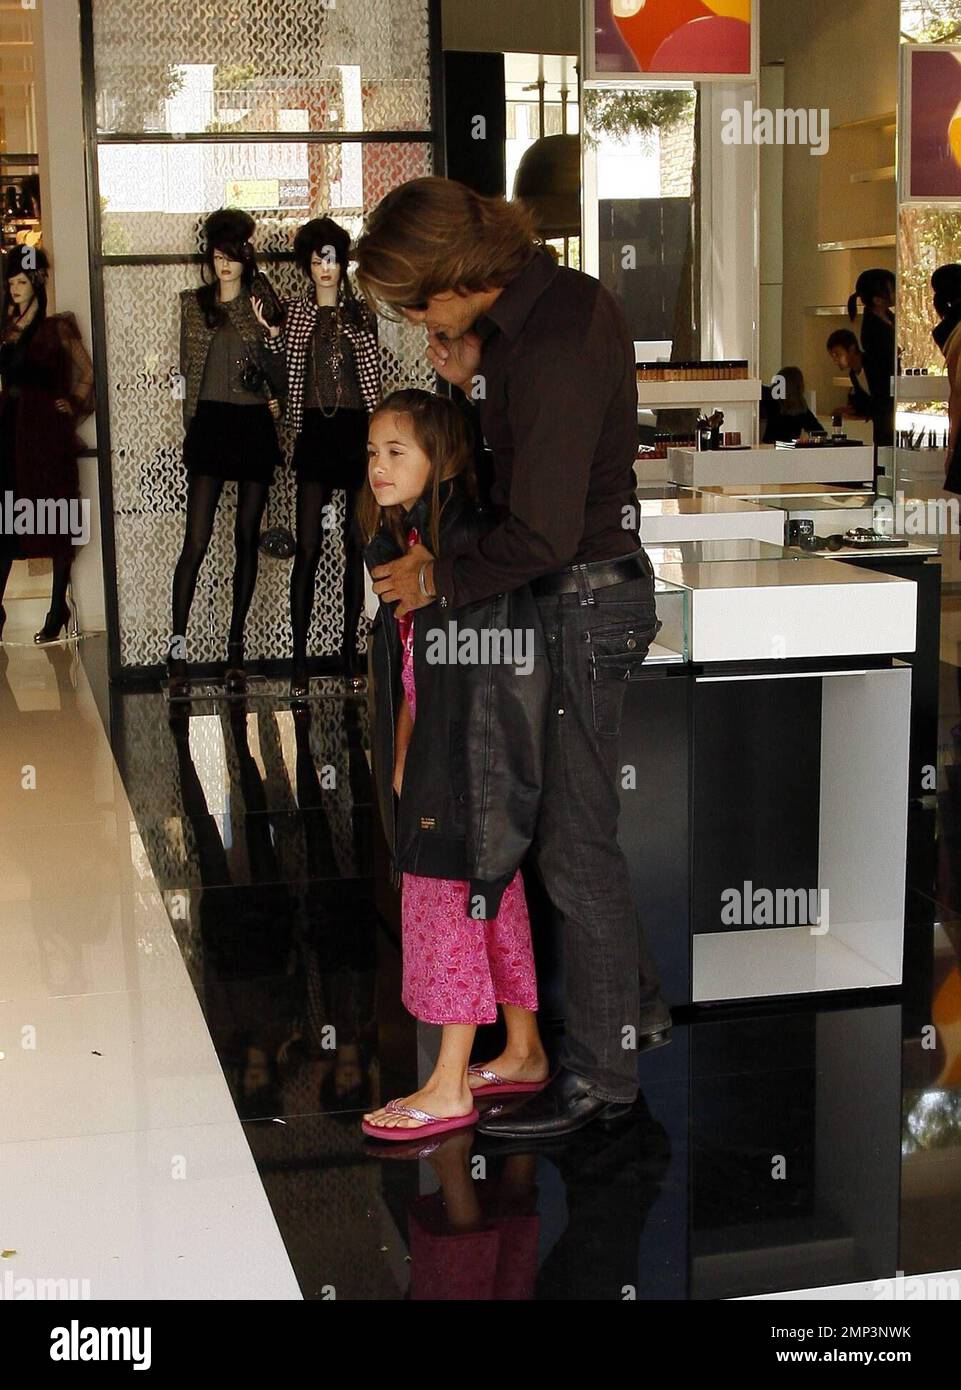 Shana Sand with her daughters and boyfriend shop at the Chanel store on Robertson  Blvd. and then stroll down the street past The Ivy. Los Angeles, CA. 6/1/08  Stock Photo - Alamy